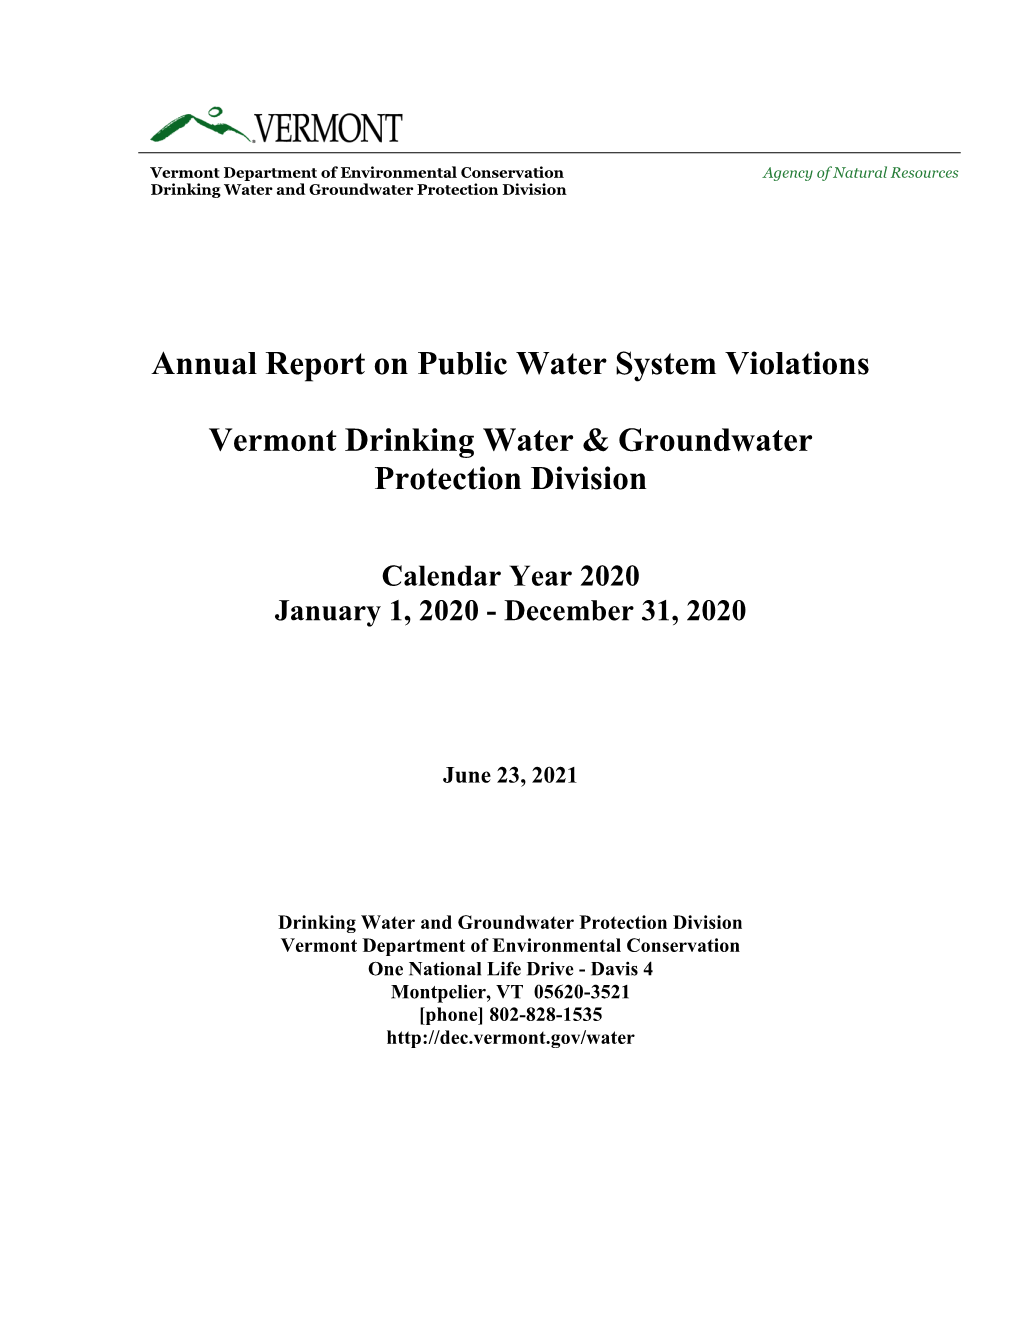 2020 Annual Report on Public Water System Violations for the State of Vermont by Accessing